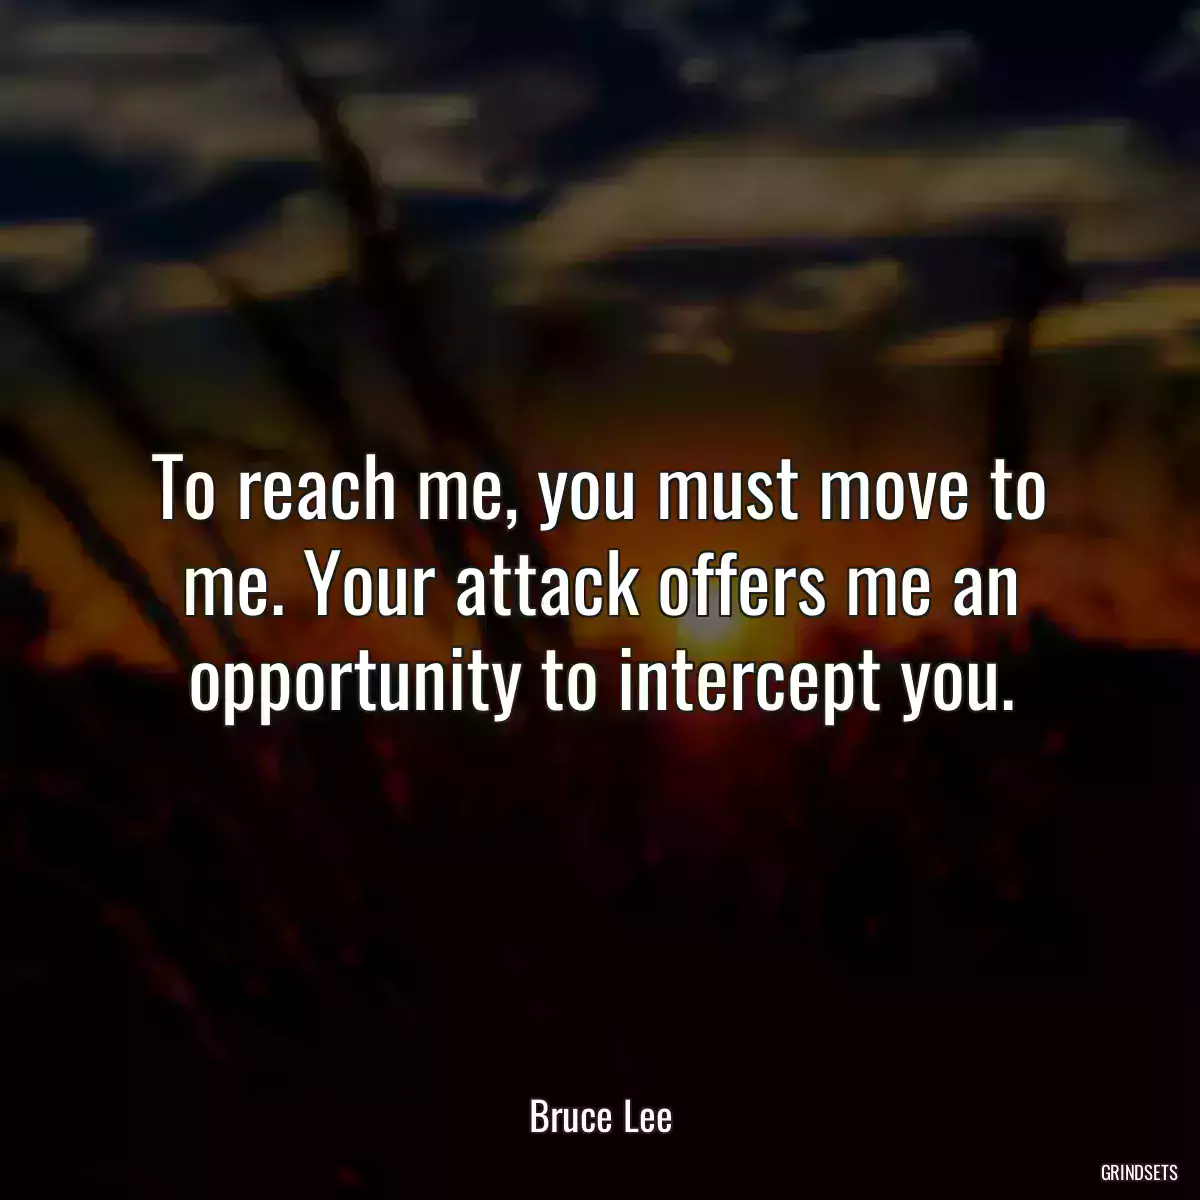 To reach me, you must move to me. Your attack offers me an opportunity to intercept you.